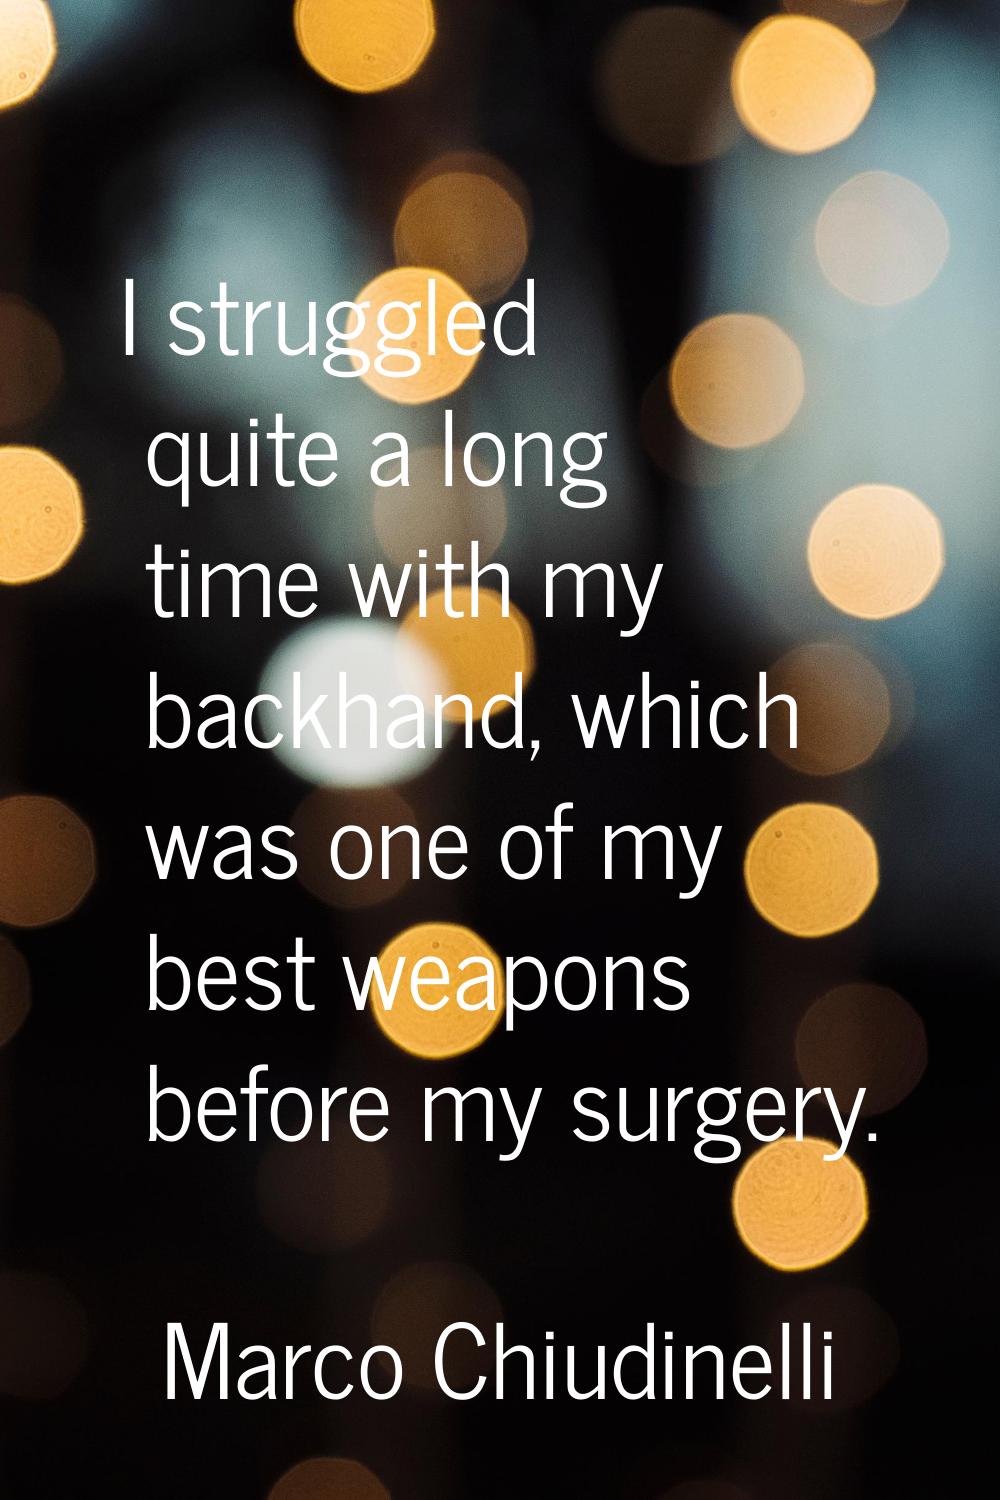 I struggled quite a long time with my backhand, which was one of my best weapons before my surgery.